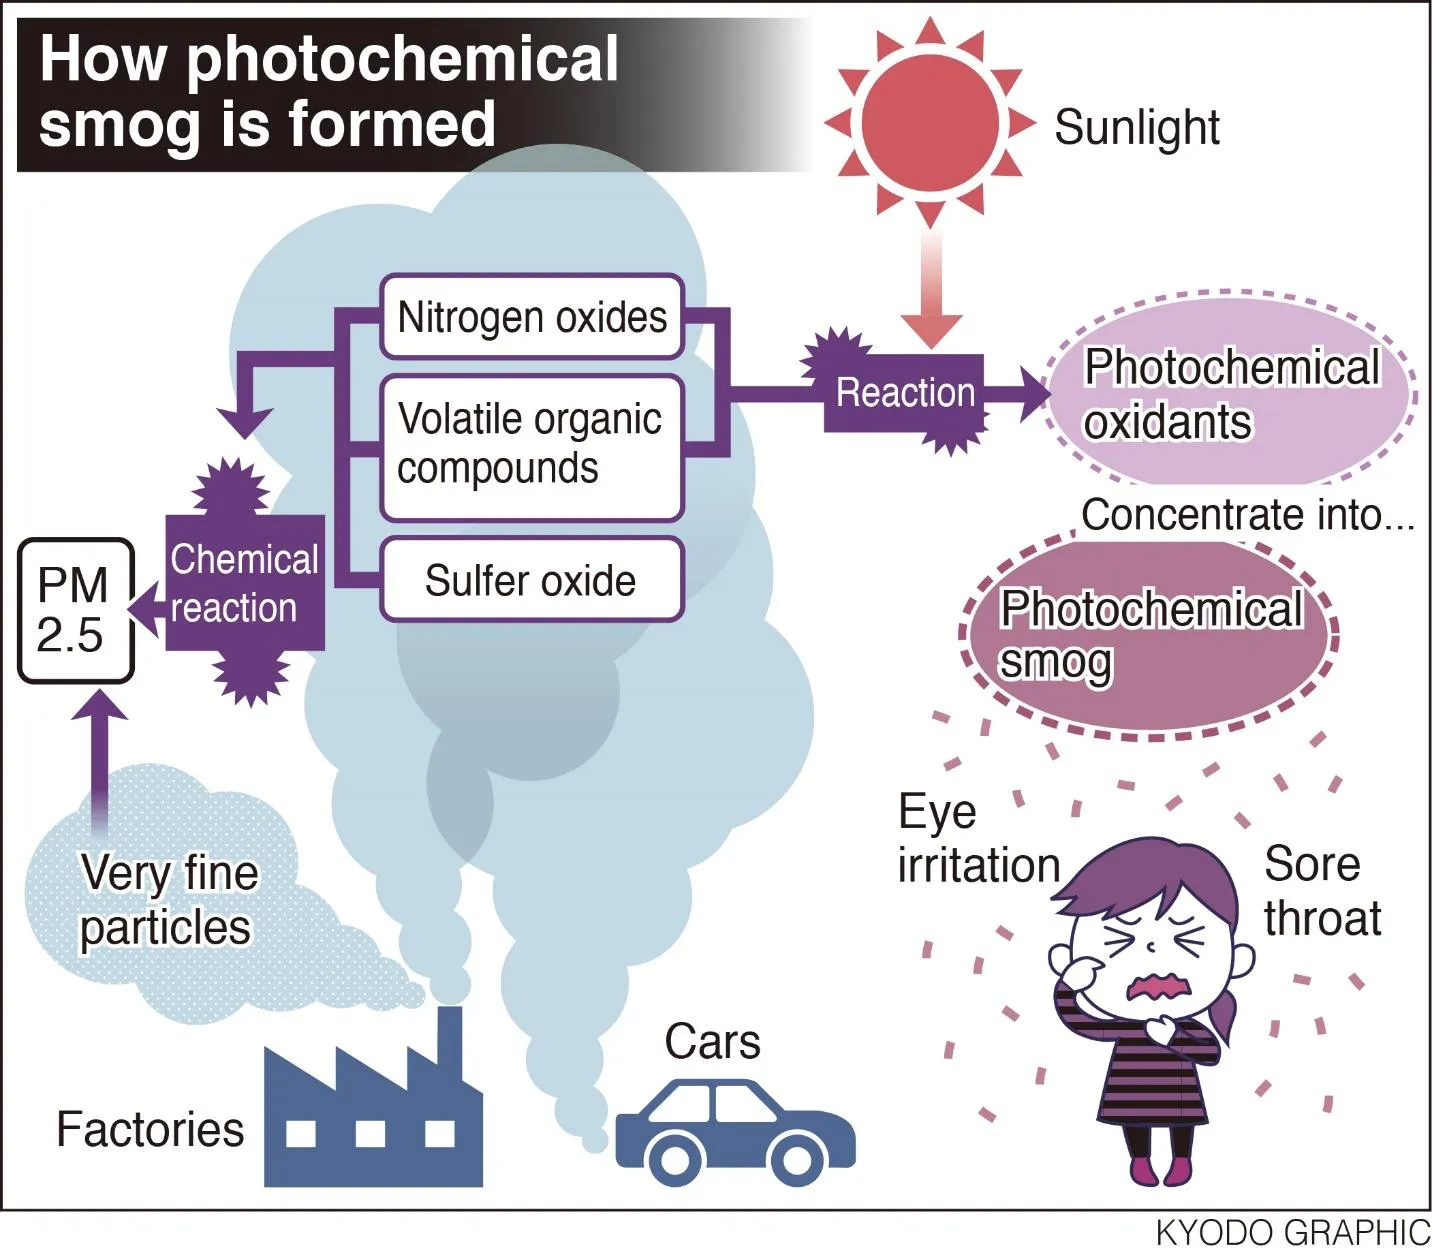 A diagram illustrating the formation of photochemical smog. It showcases how nitrogen oxides, released from cars and factories, and volatile organic compounds interact in the presence of sunlight. These reactions produce photochemical oxidants, which can condense to form smog. A cloud represents the smog, and side effects like eye irritation and sore throat are depicted by an animated character with reddened eyes and a hand on its throat.